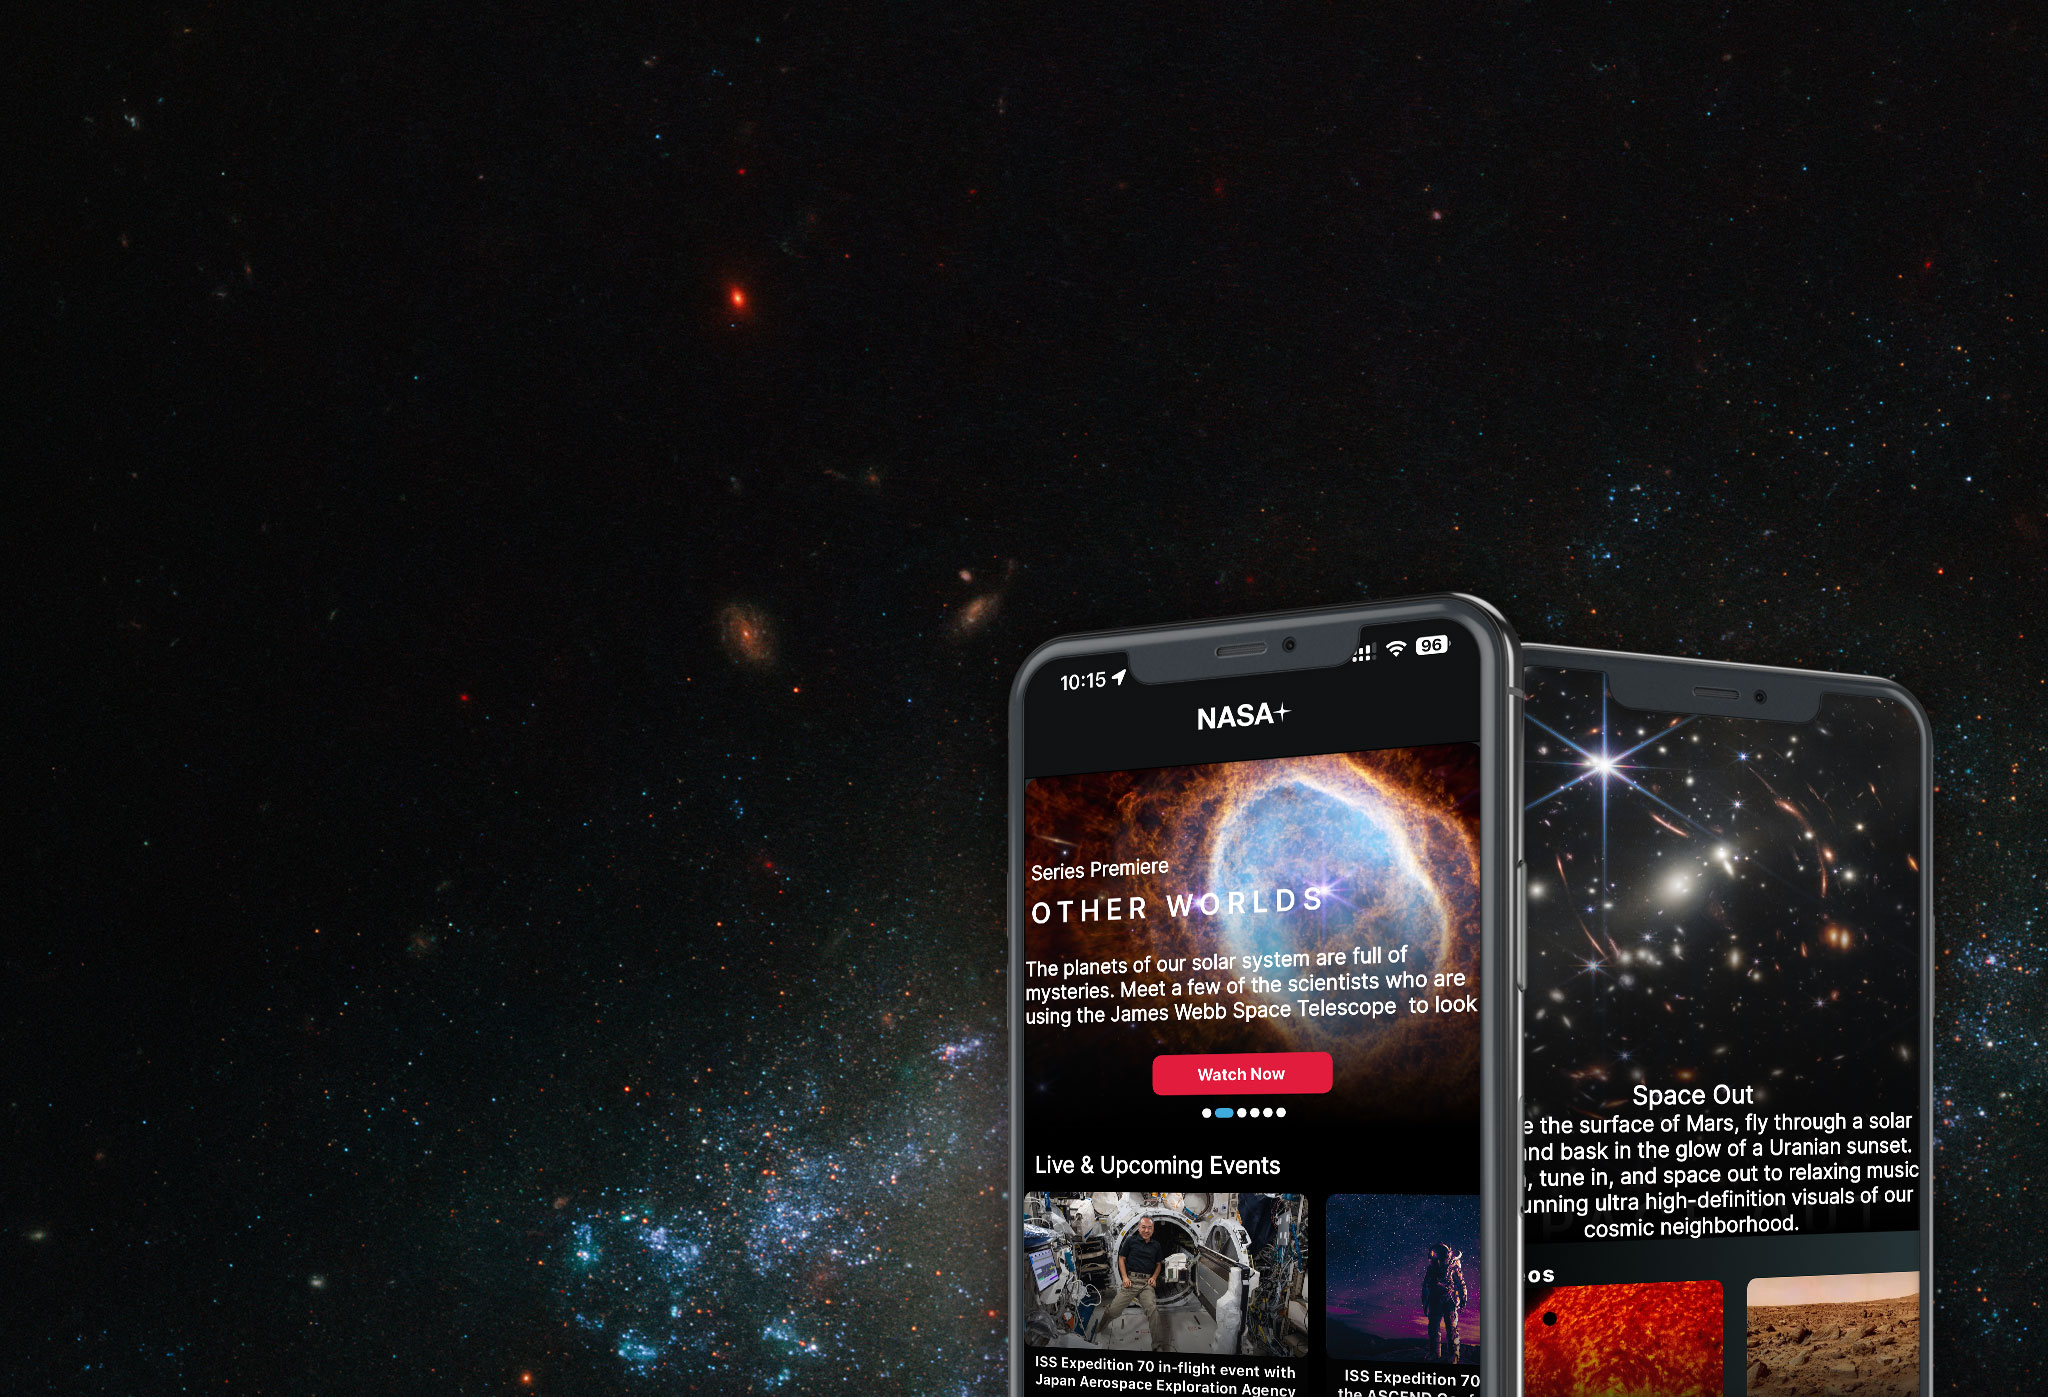 Screenshots of the NASA App are shown on mobile phones against a space-themed background